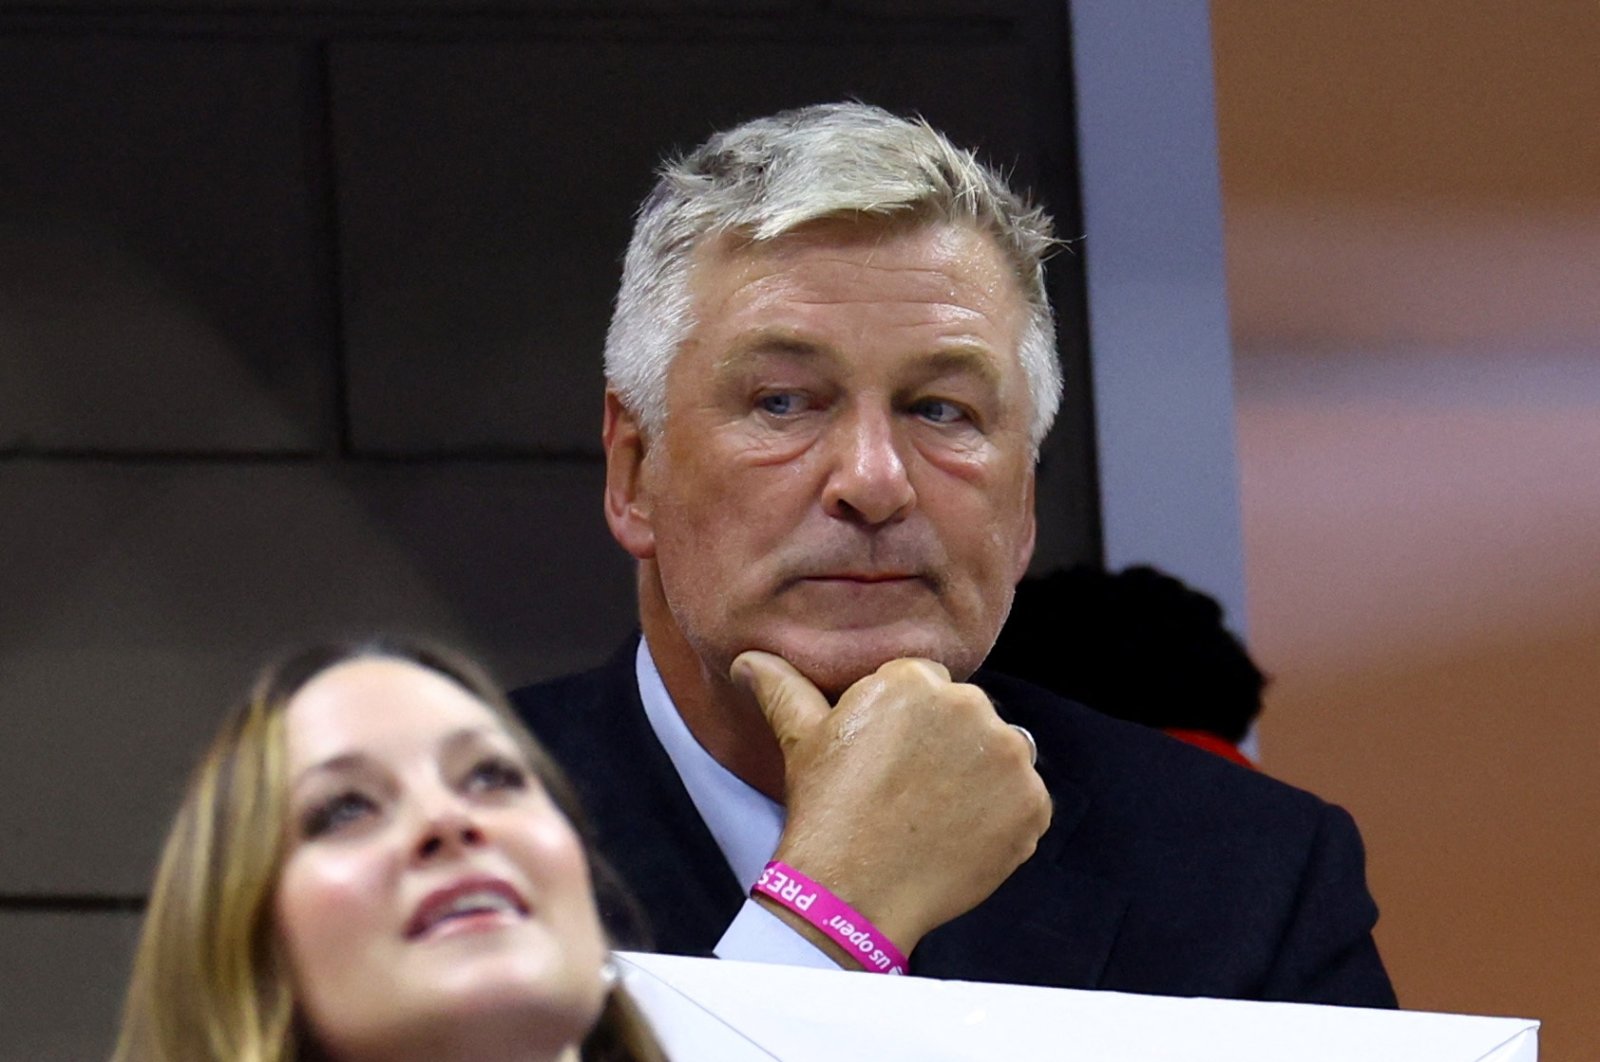 Actor Alec Baldwin is seen before the semifinal match between Spain&#039;s Carlos Alcaraz and Frances Tiafoe of the U.S. during the U.S. Open, New York, U.S., Sept. 9, 2022. (REUTERS Photo)